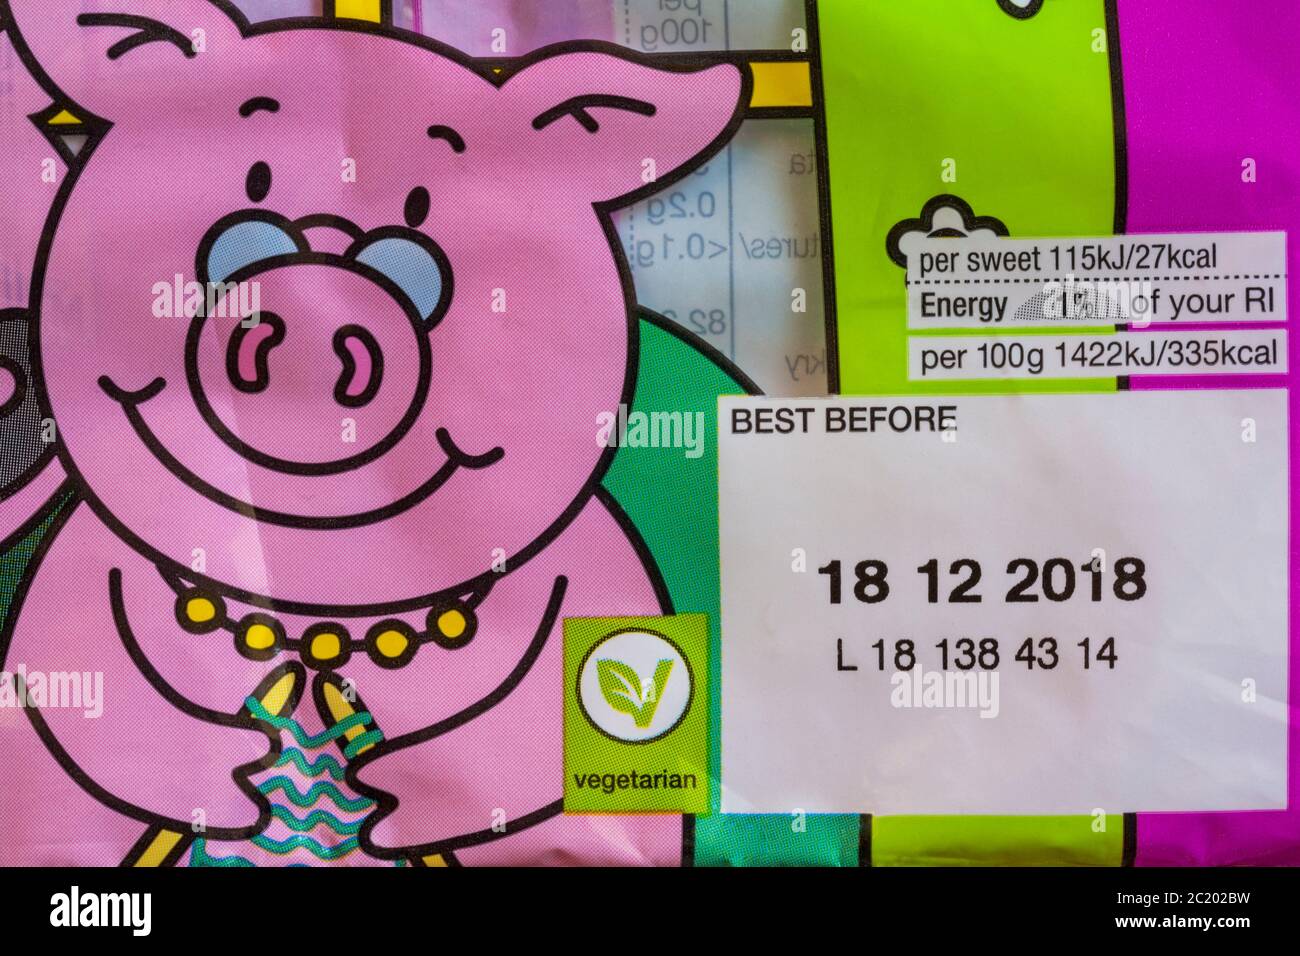 Best before date on packet of M&S percy's parents percy pig sweets Stock Photo